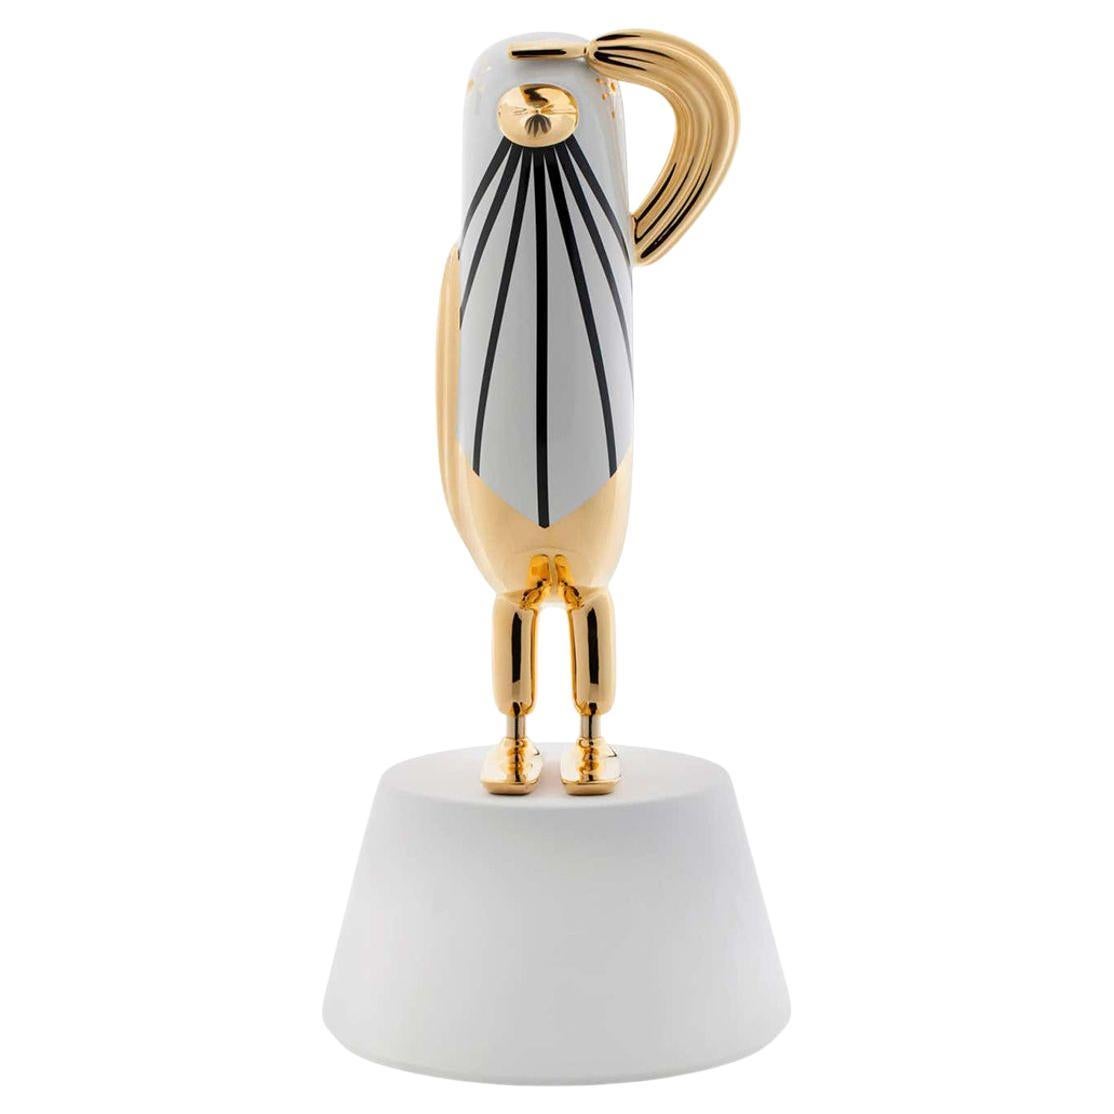 Hopebird Decoration 4 Glossy Gold White And Black By Bosa For Sale